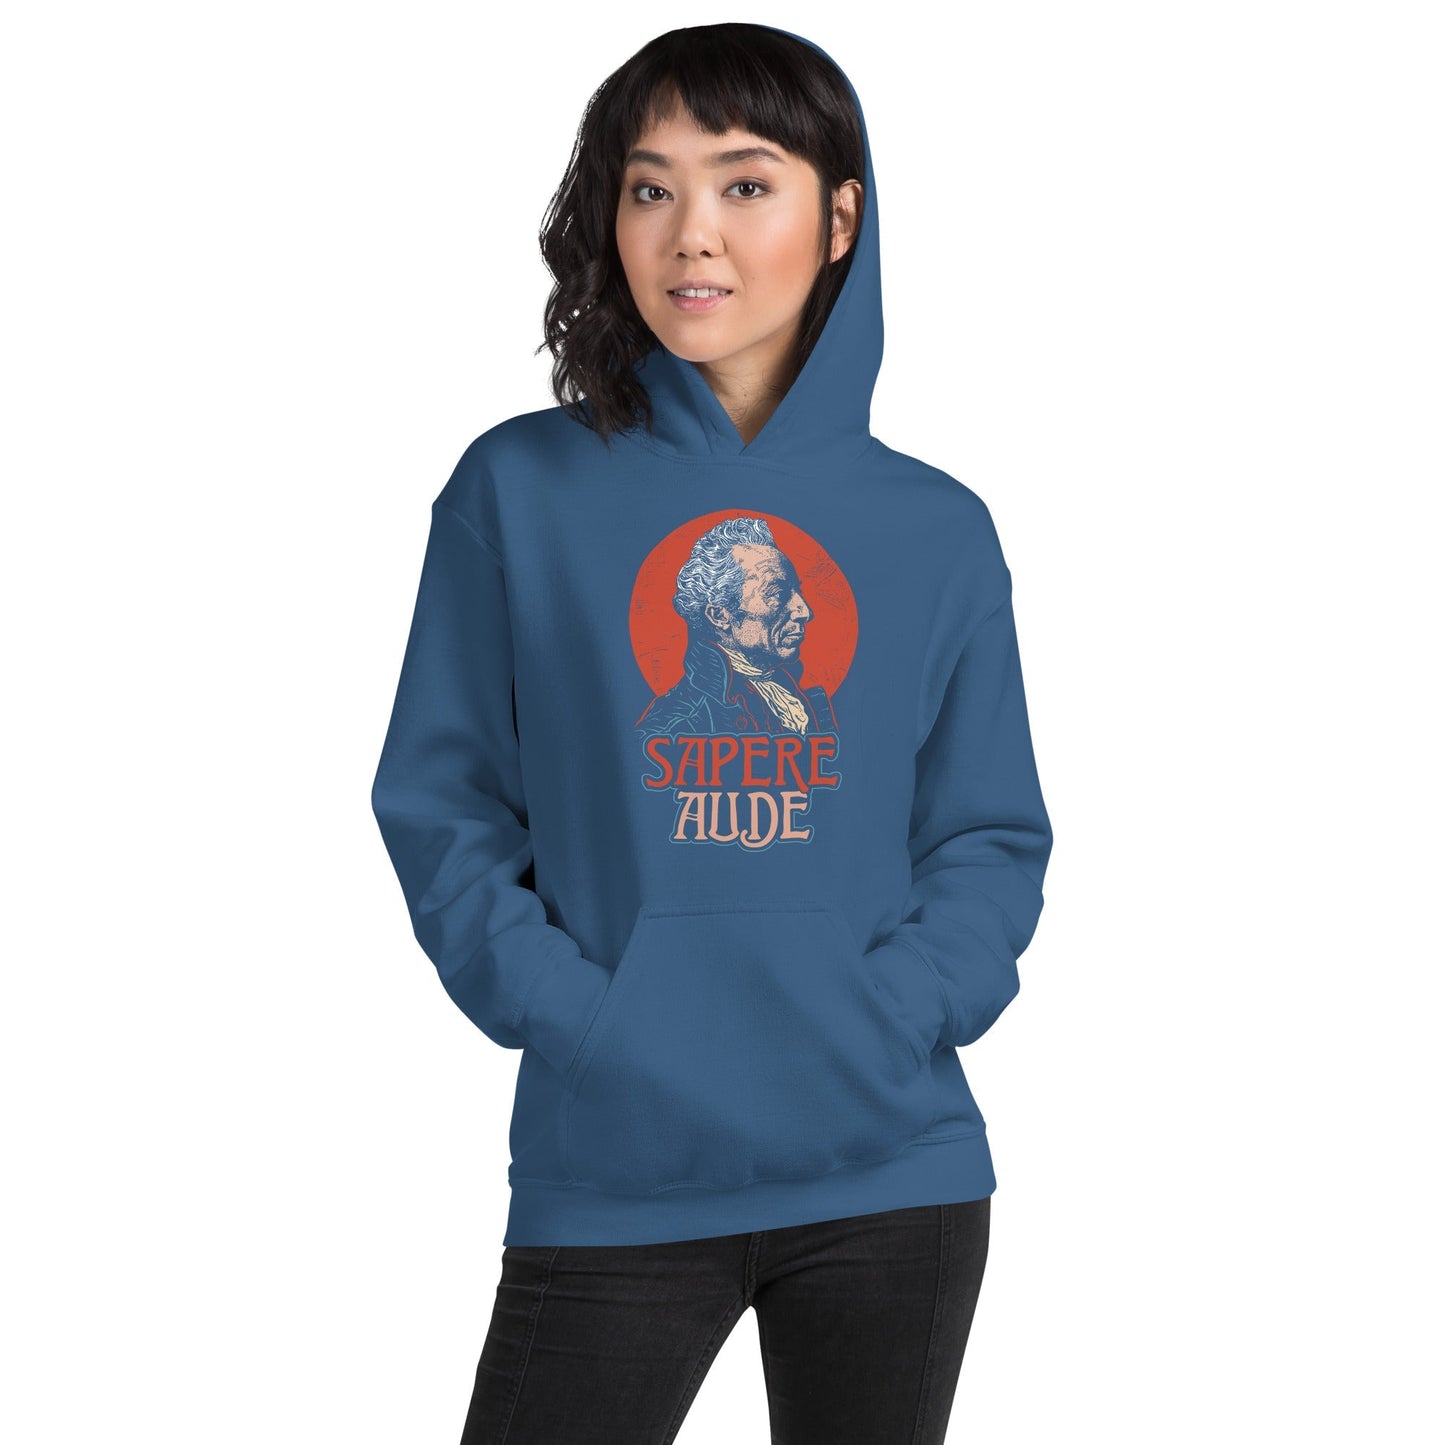 Immanuel Kant - Sapere Aude - Hoodie